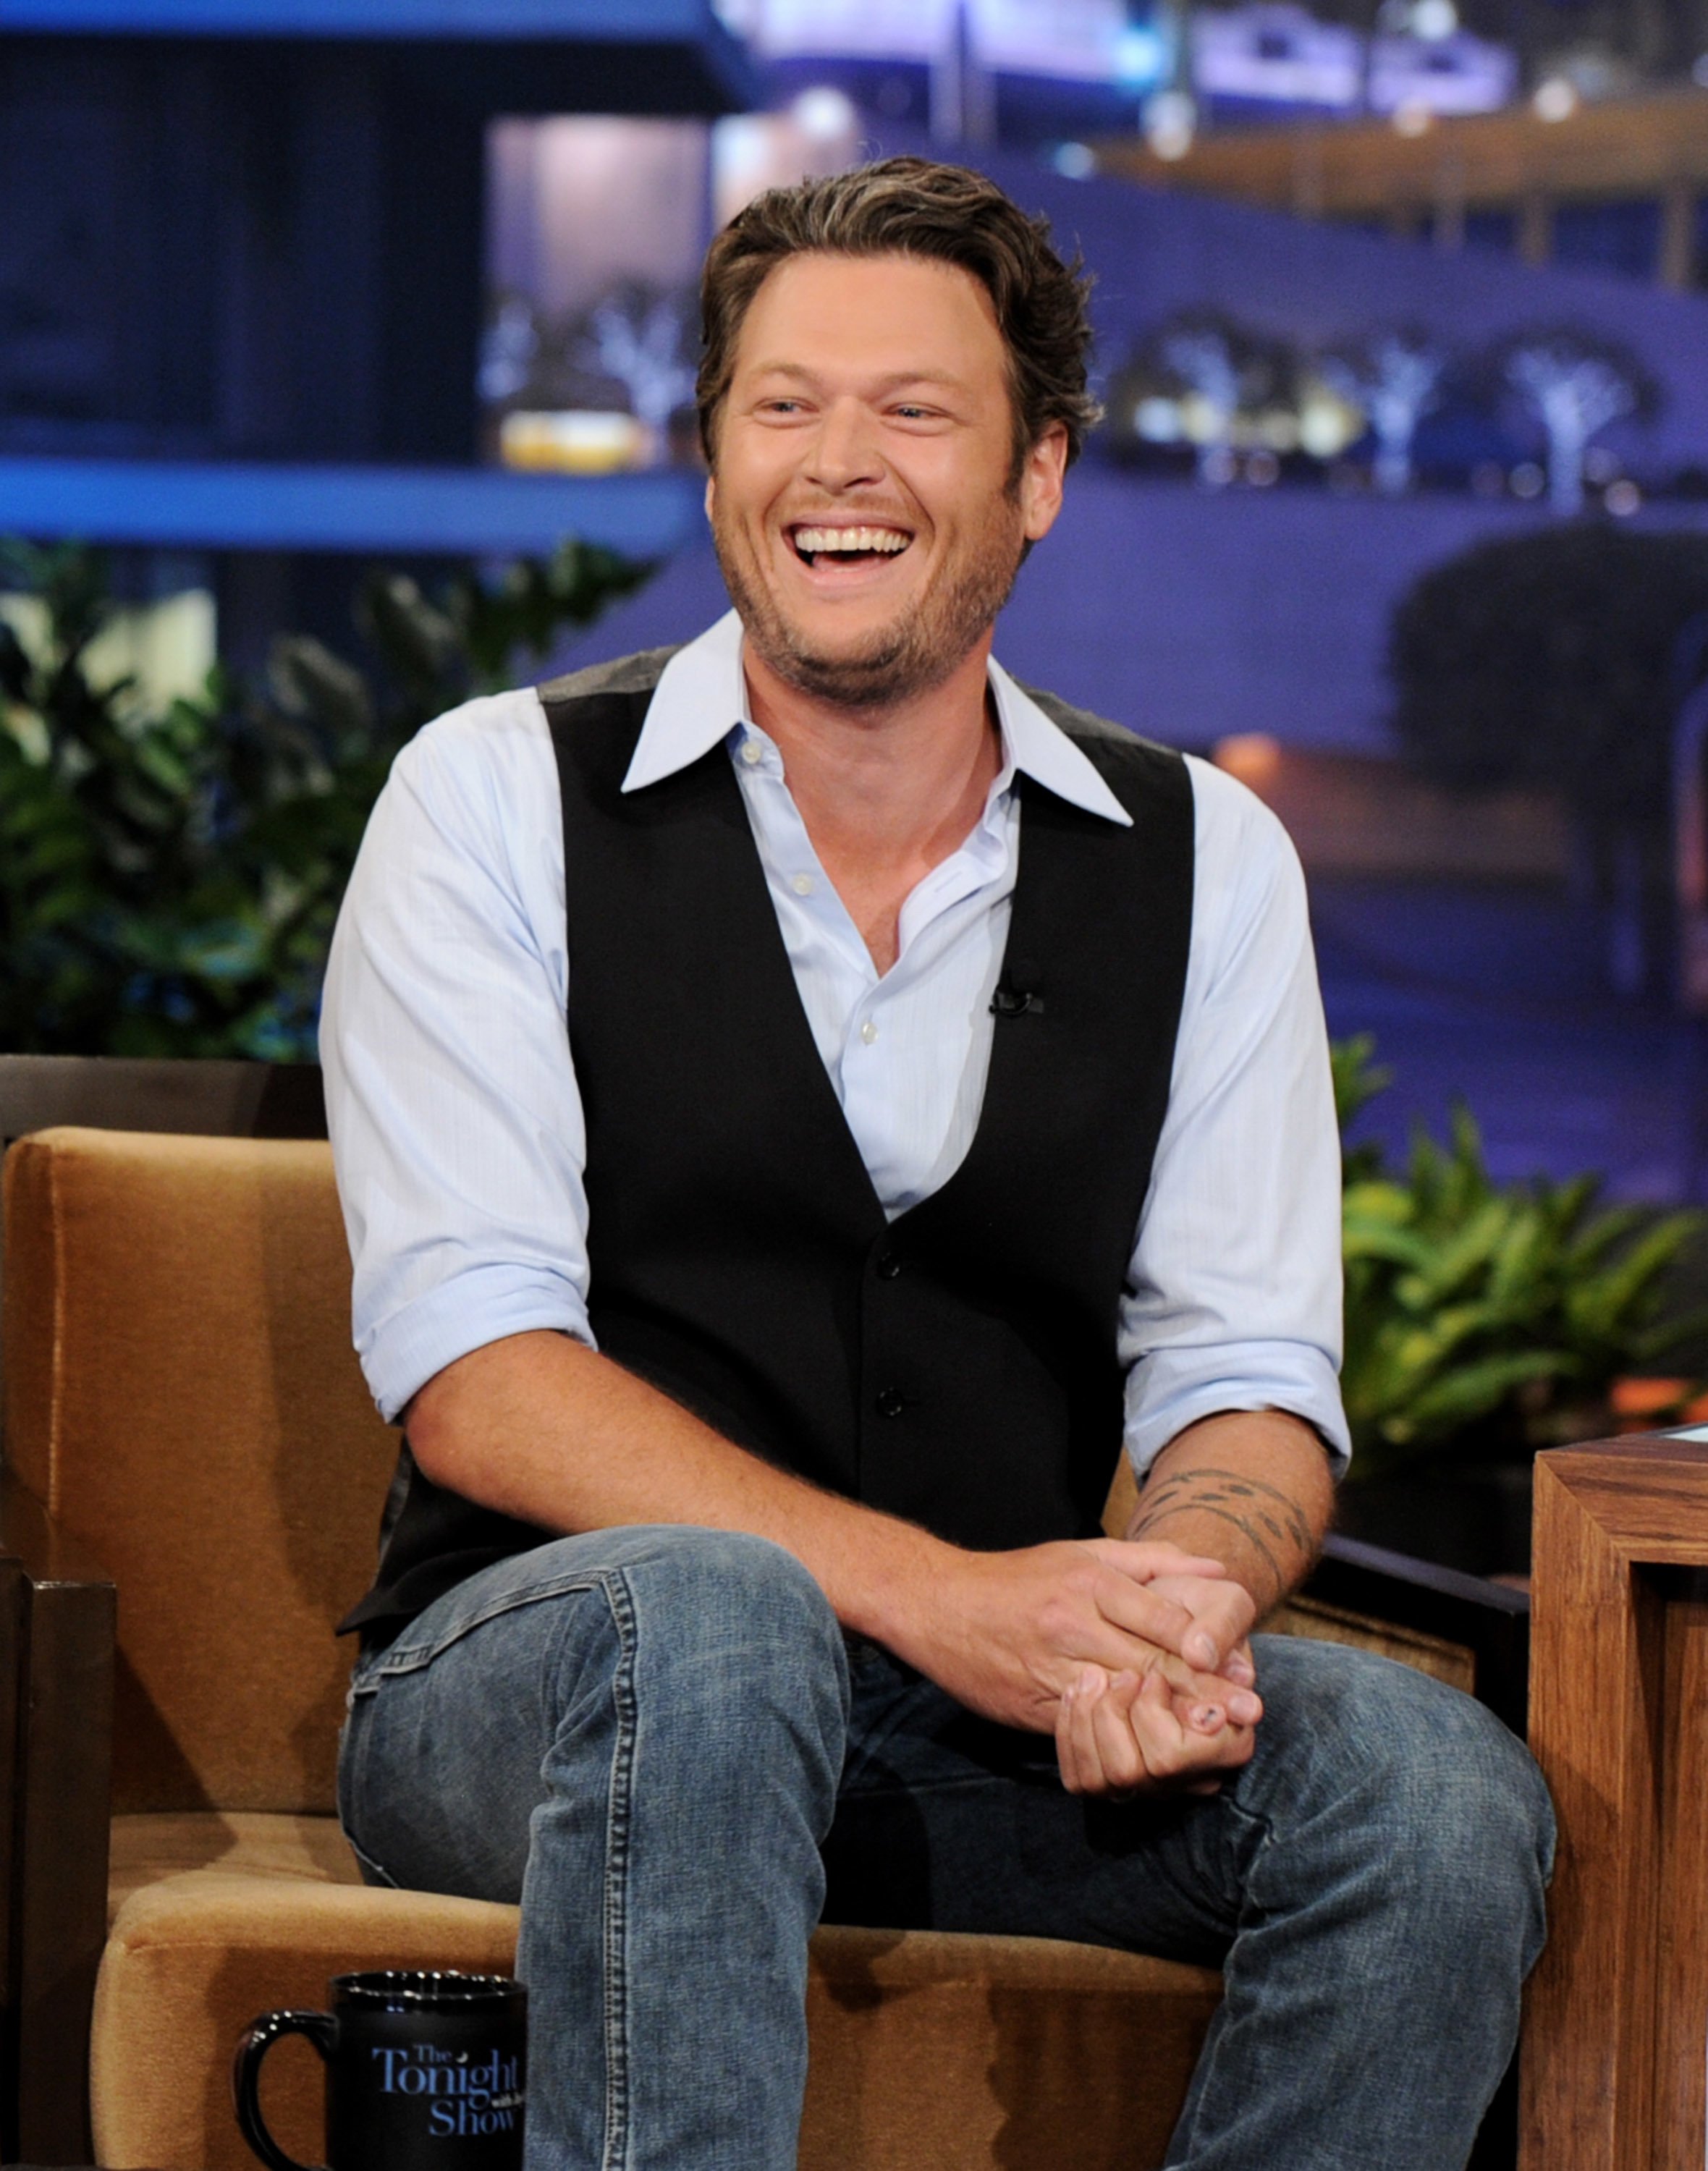 Singer Blake Shelton appears on the Tonight Show with Jay Leno at NBC Studios on June 15, 2011 | Photo: Getty Images